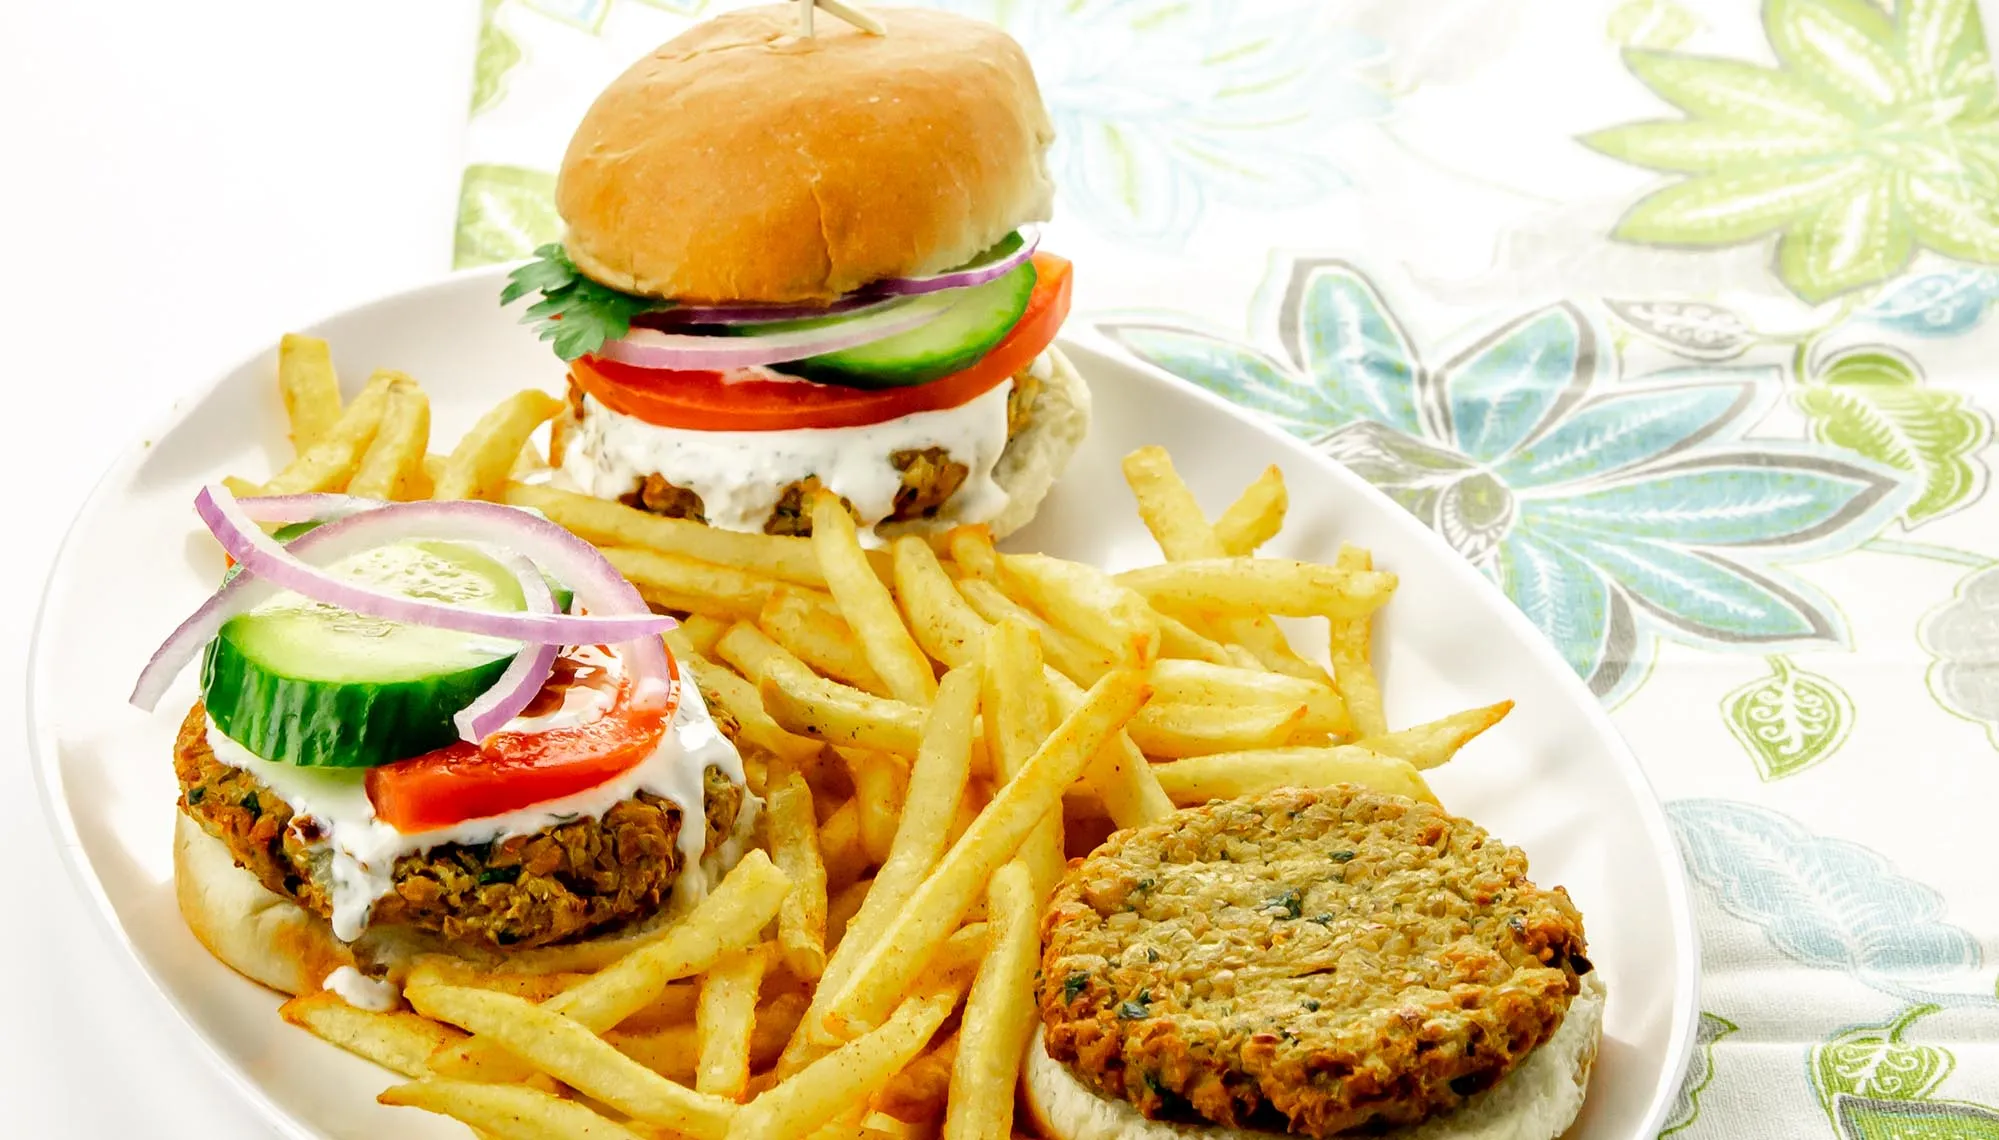 3 sliders with falafel patties on a platter with fries